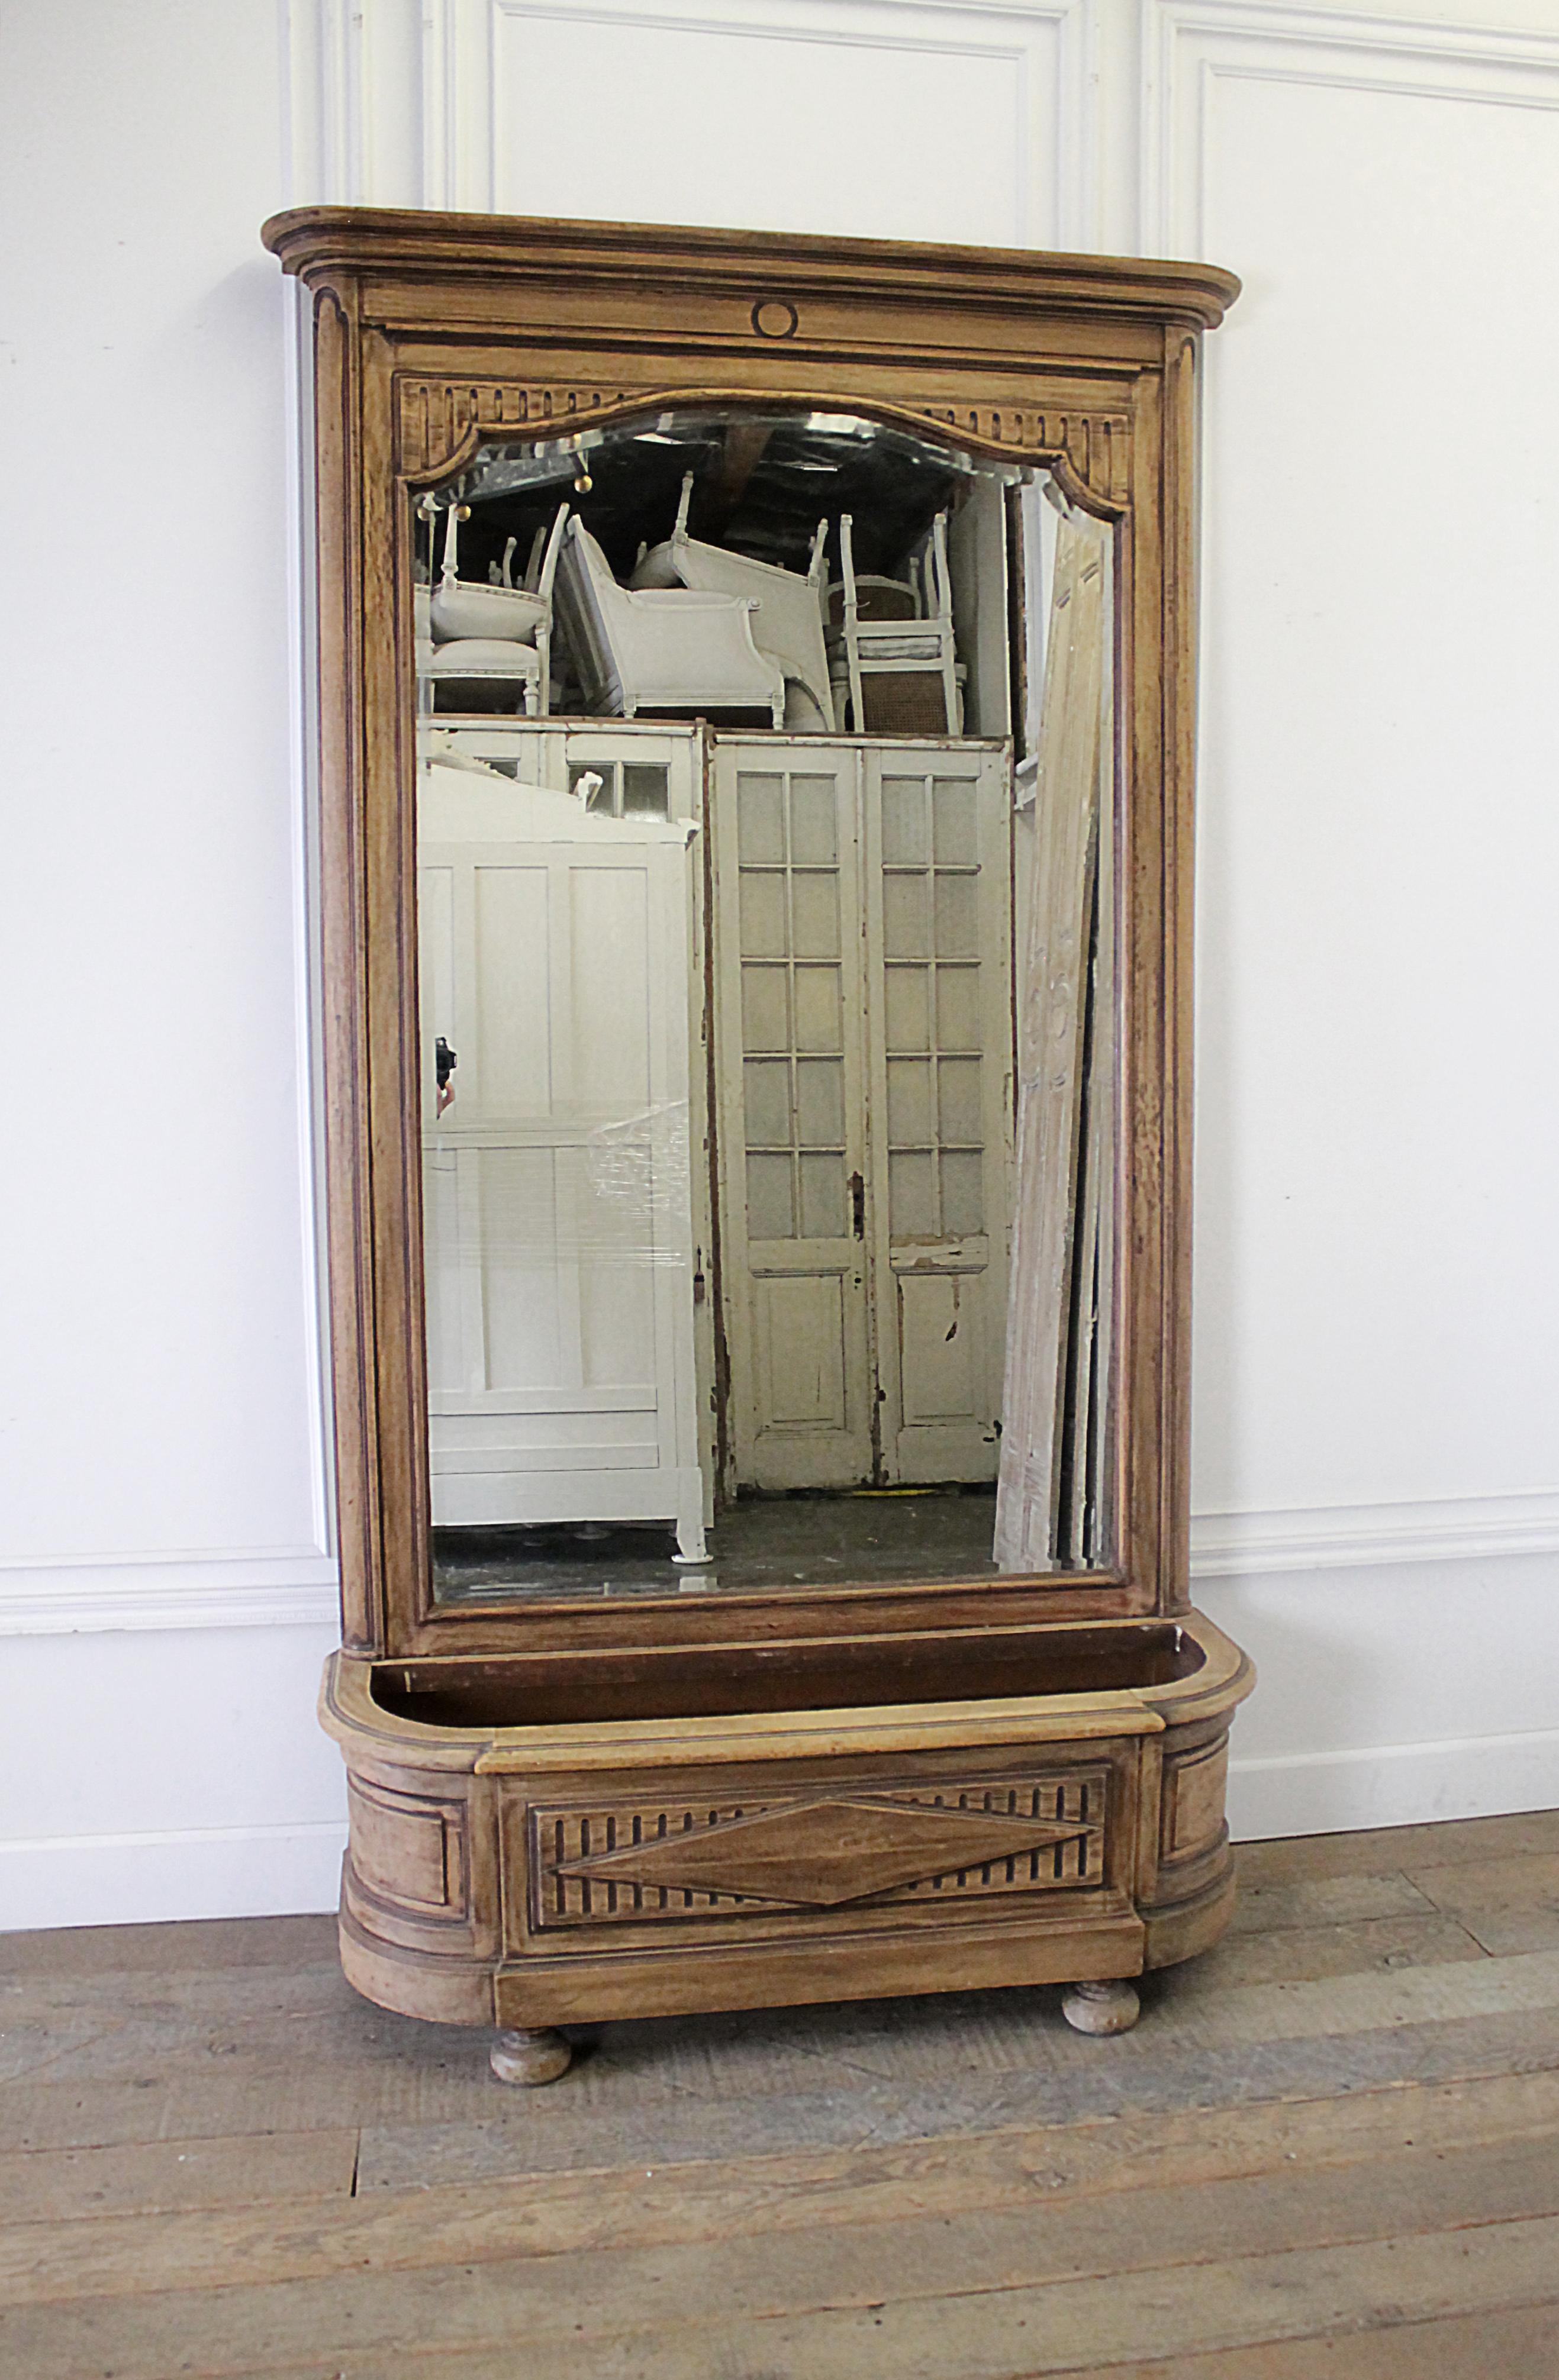 Early 20th century Italian Trumeau mirror with plant stand
A medium walnut color, that has been sanded to show a two-tone finish. 
This is 2 pieces, the mirror separates from the base.
Measures: 17